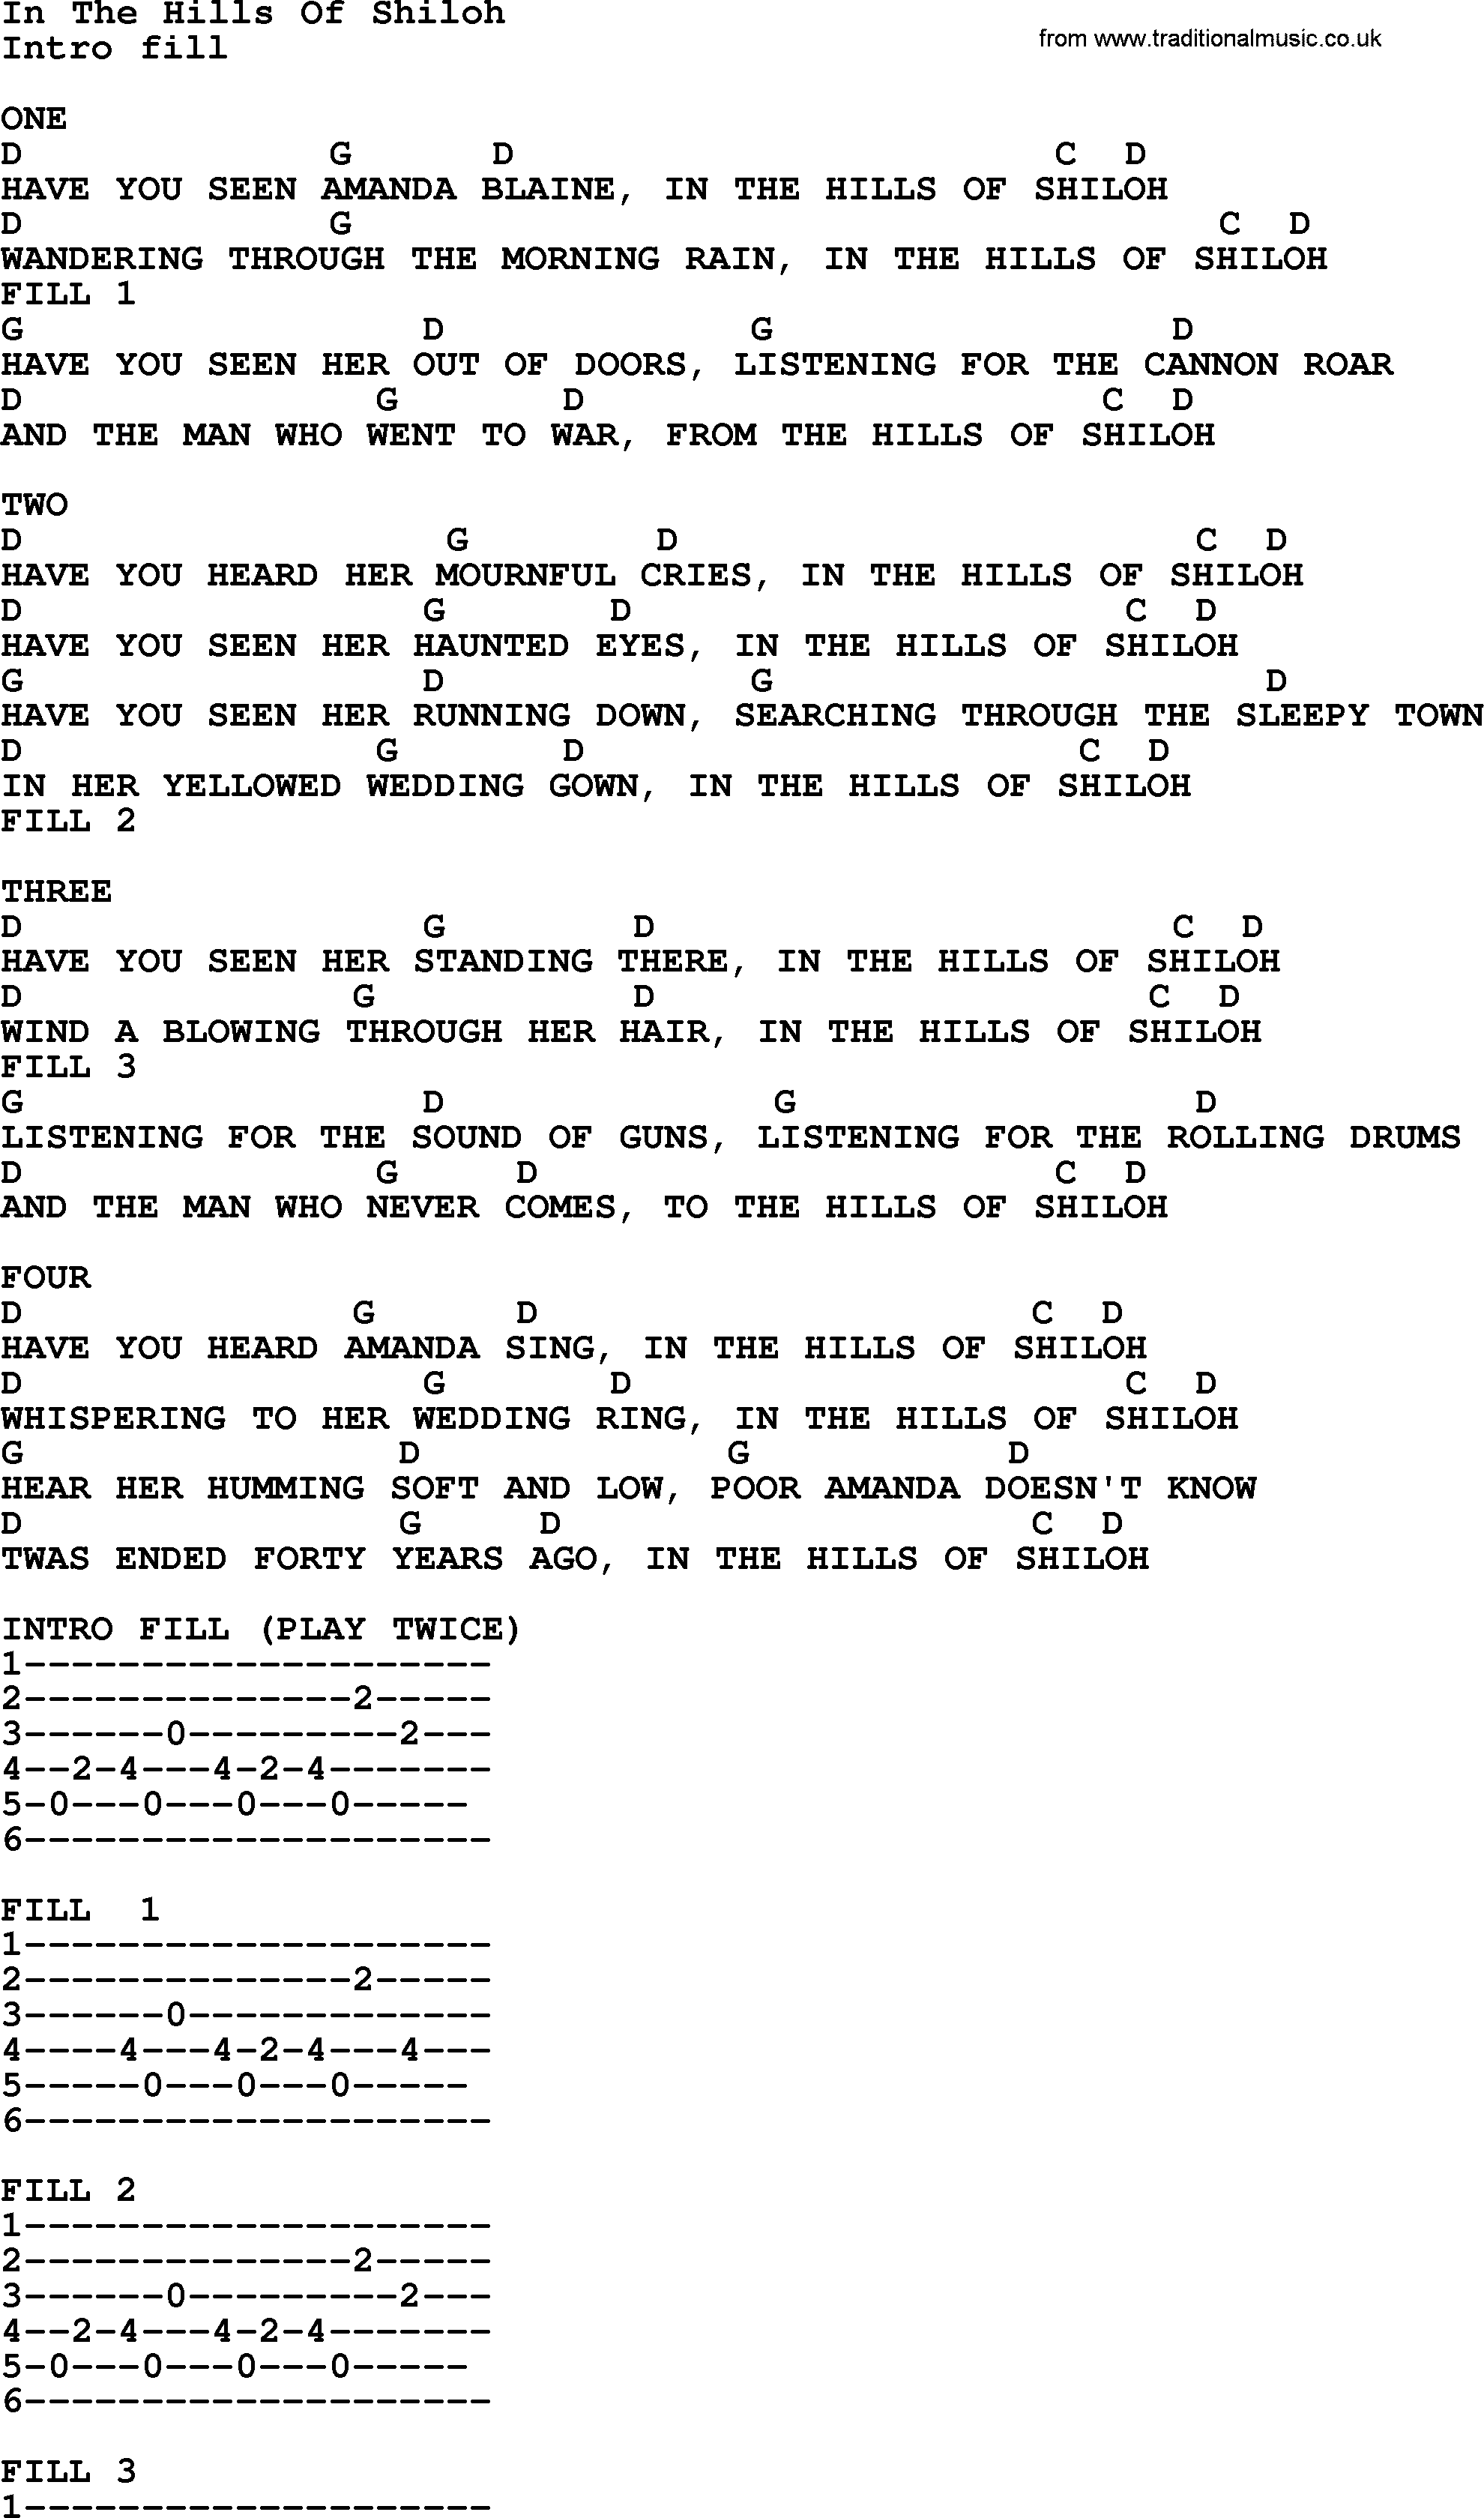 Bluegrass song: In The Hills Of Shiloh, lyrics and chords